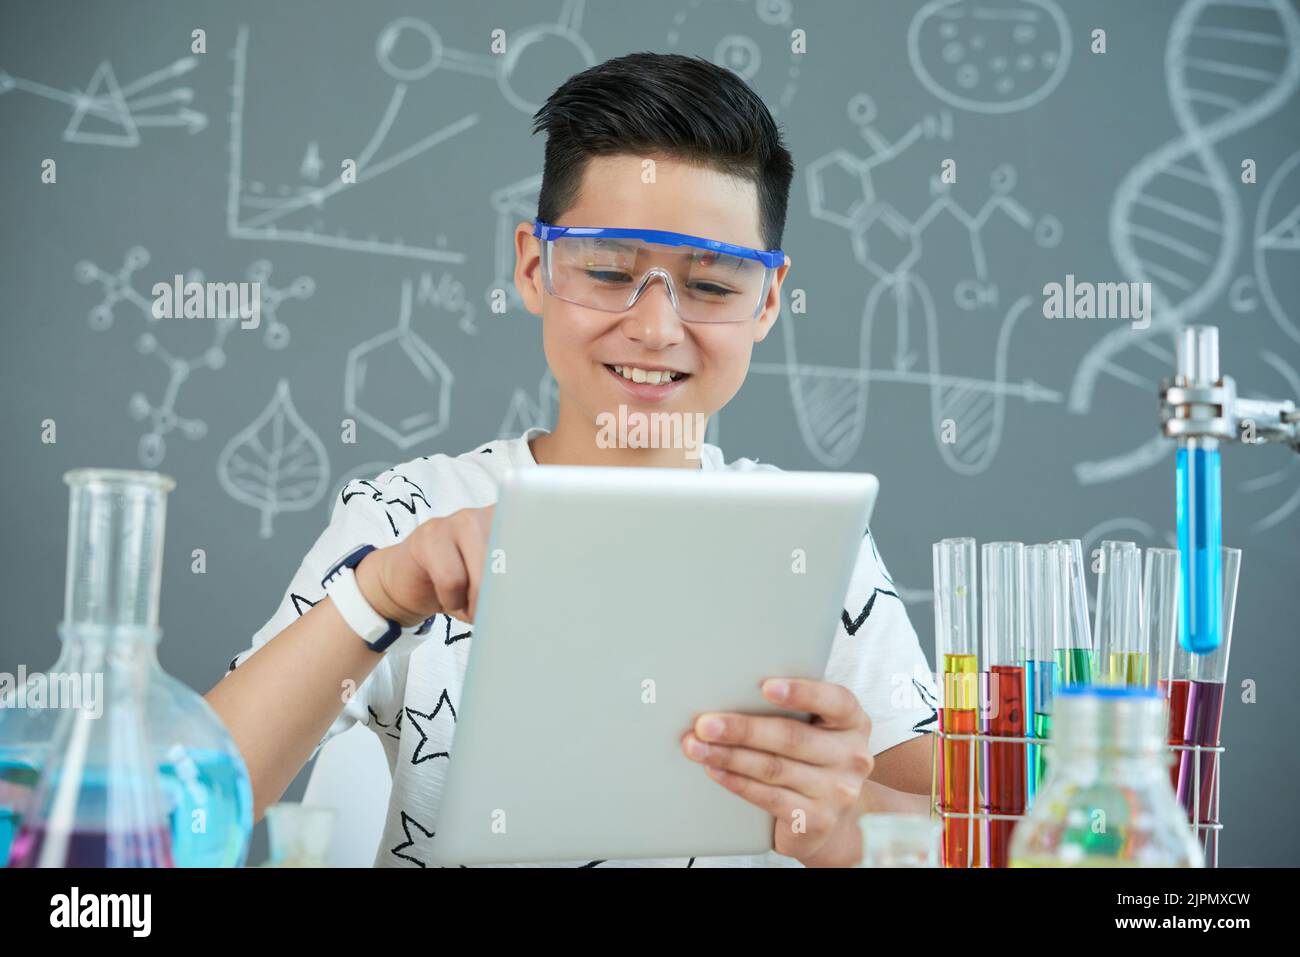 Cheerful Asian pupil wearing protective goggles using digital tablet while finishing school project at modern chemistry class, portrait shot Stock Photo